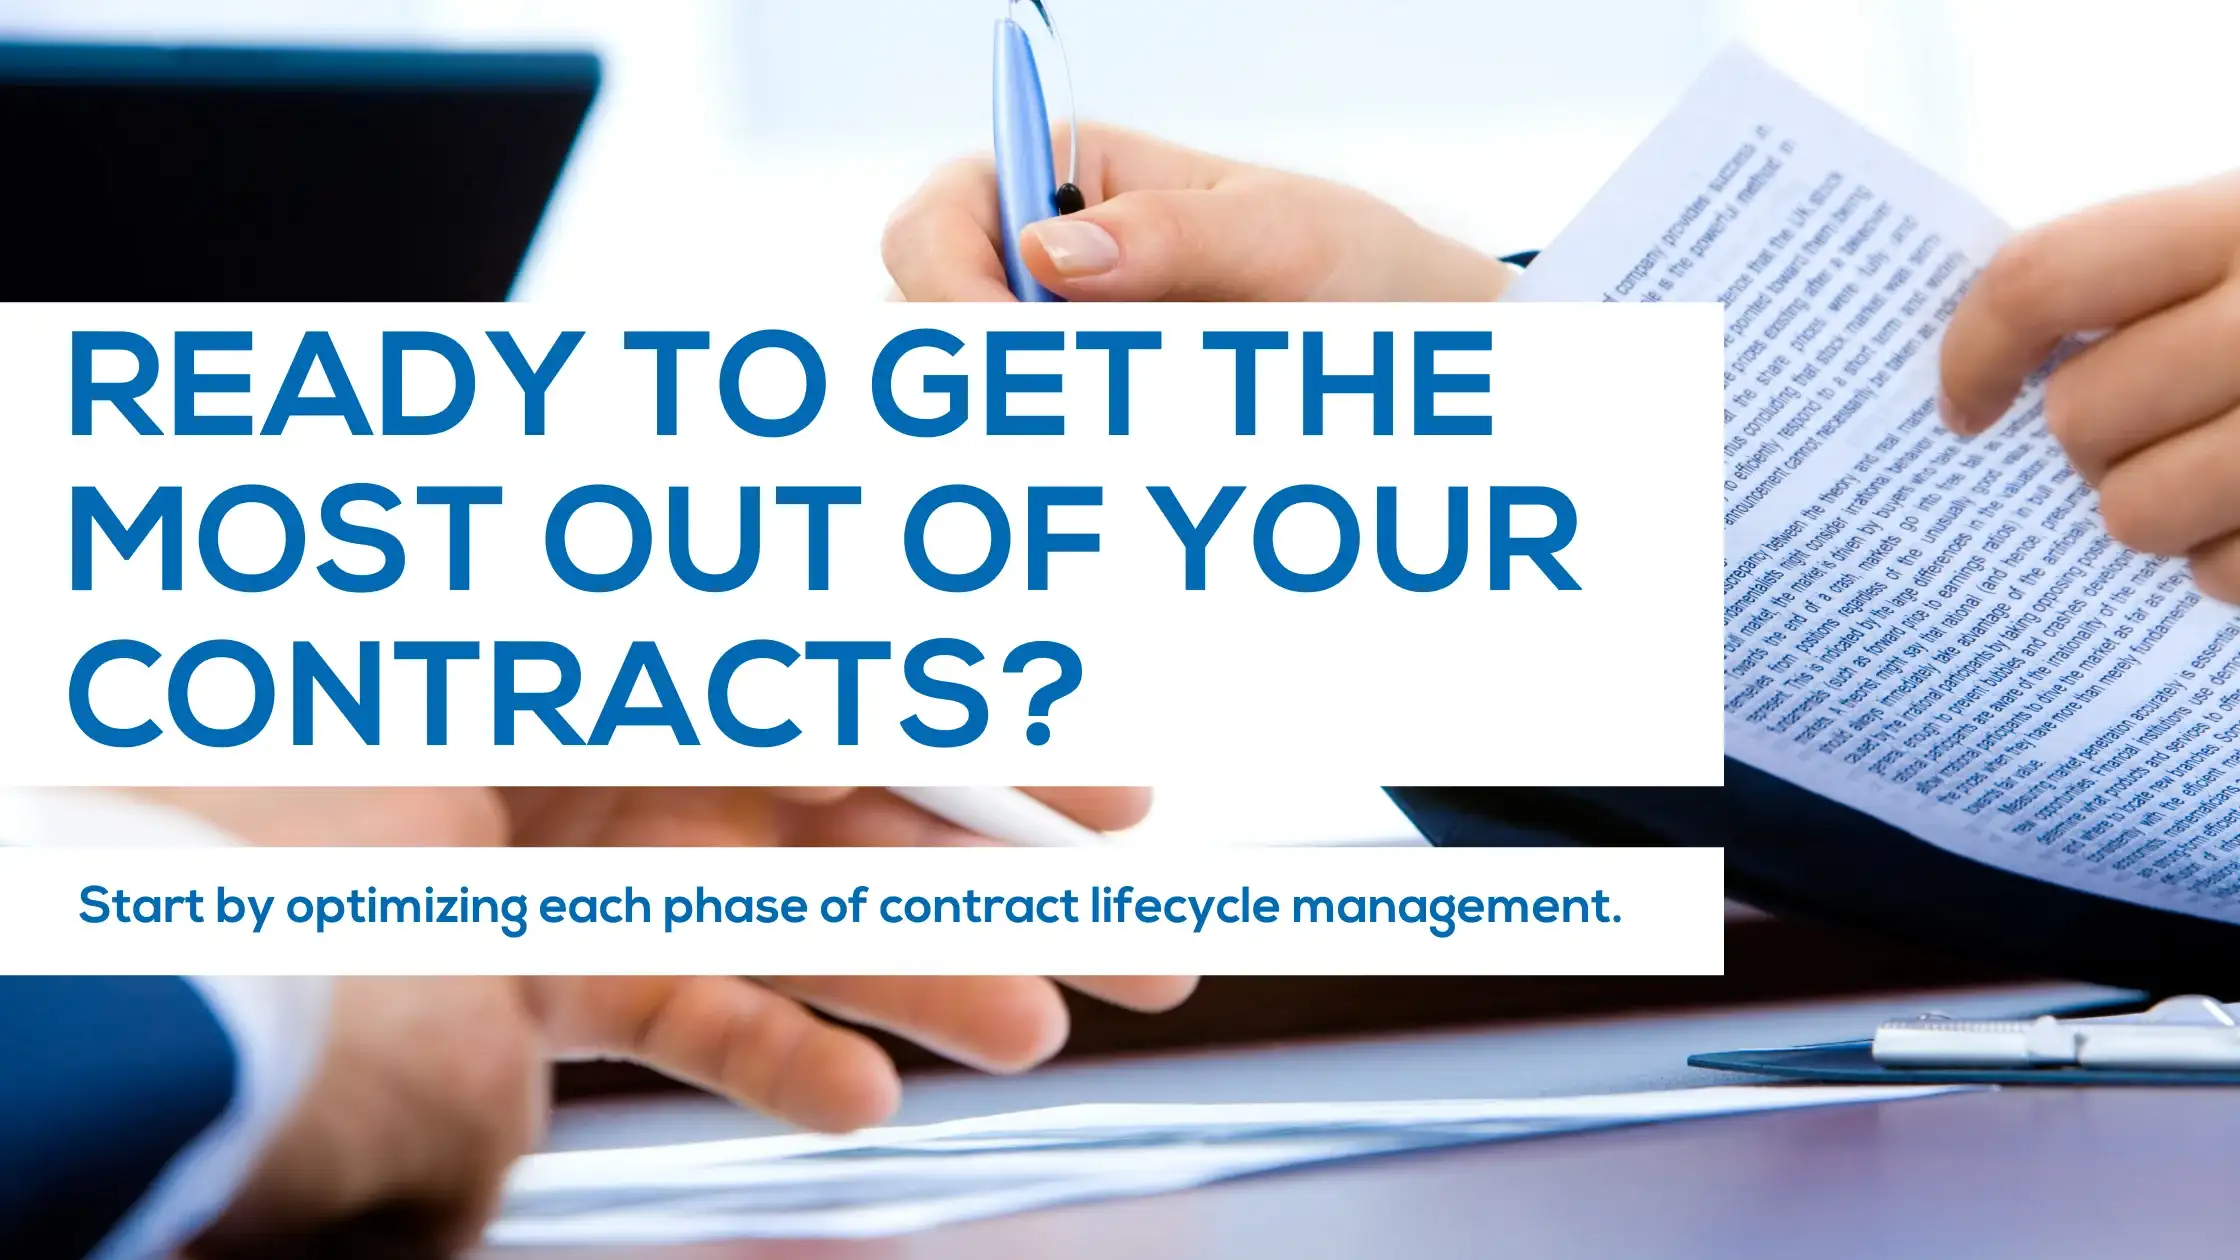 Ready to Get the Most Out of Your Contracts